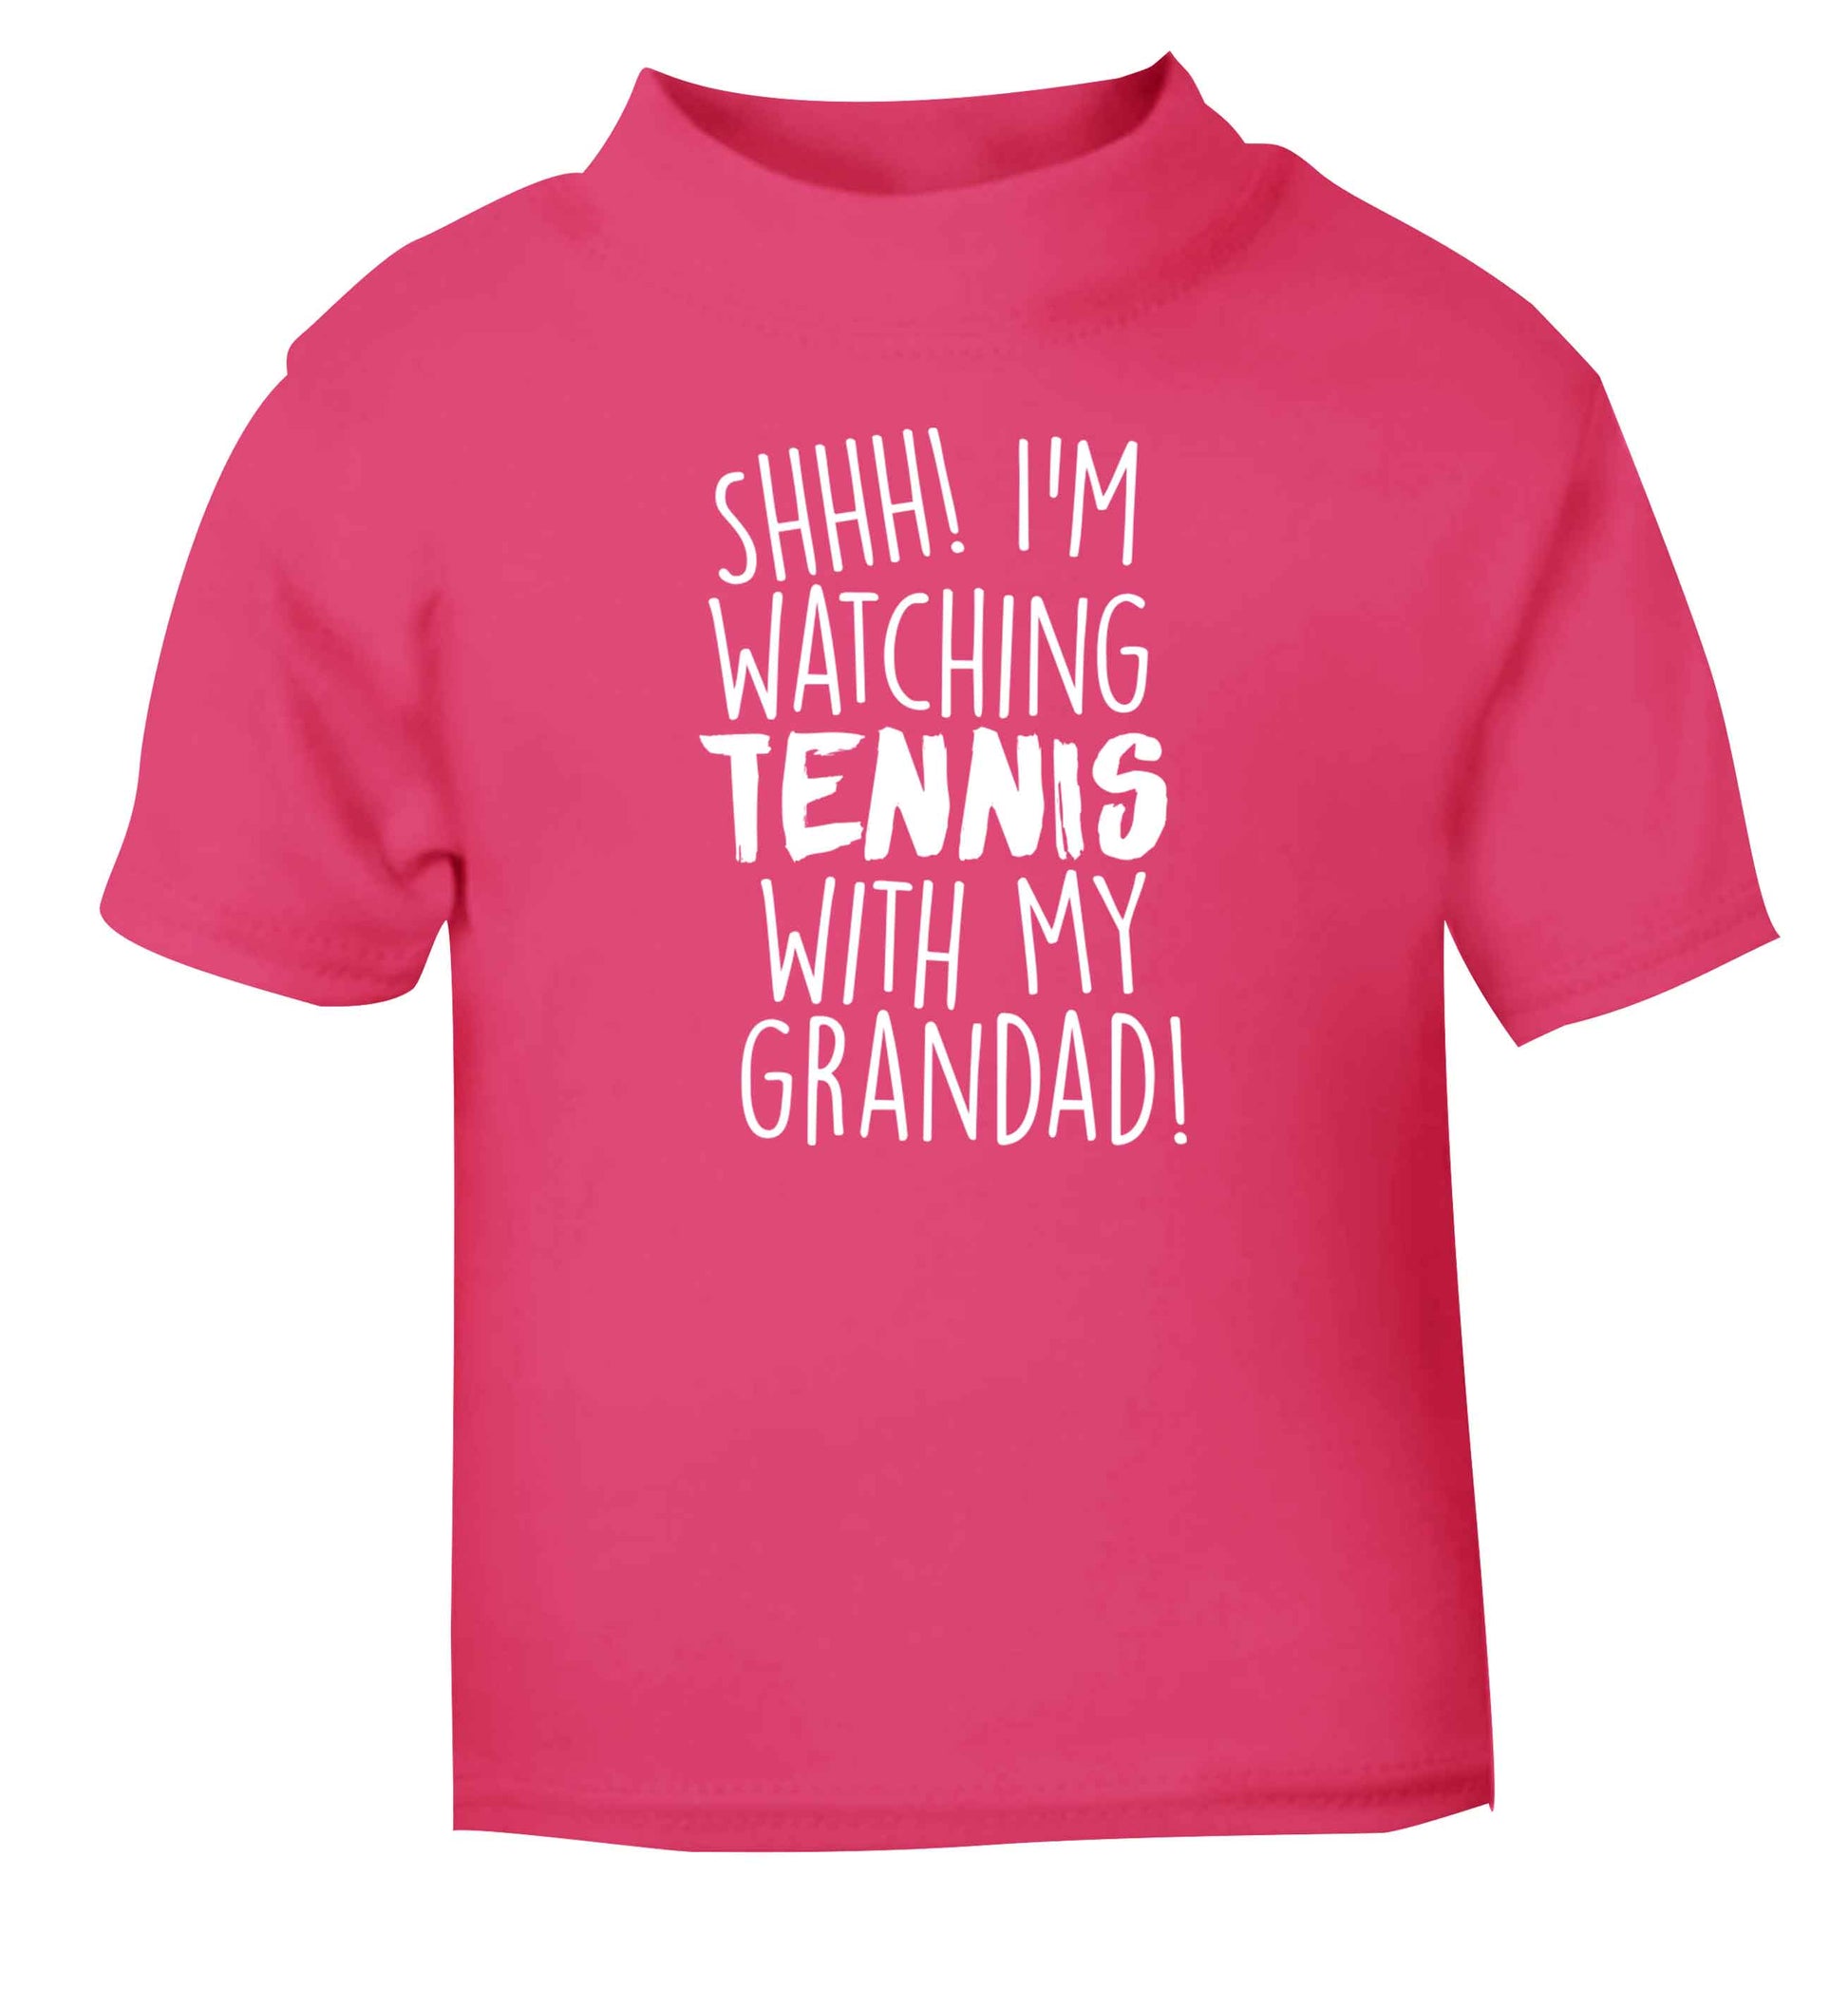 Shh! I'm watching tennis with my grandad! pink Baby Toddler Tshirt 2 Years